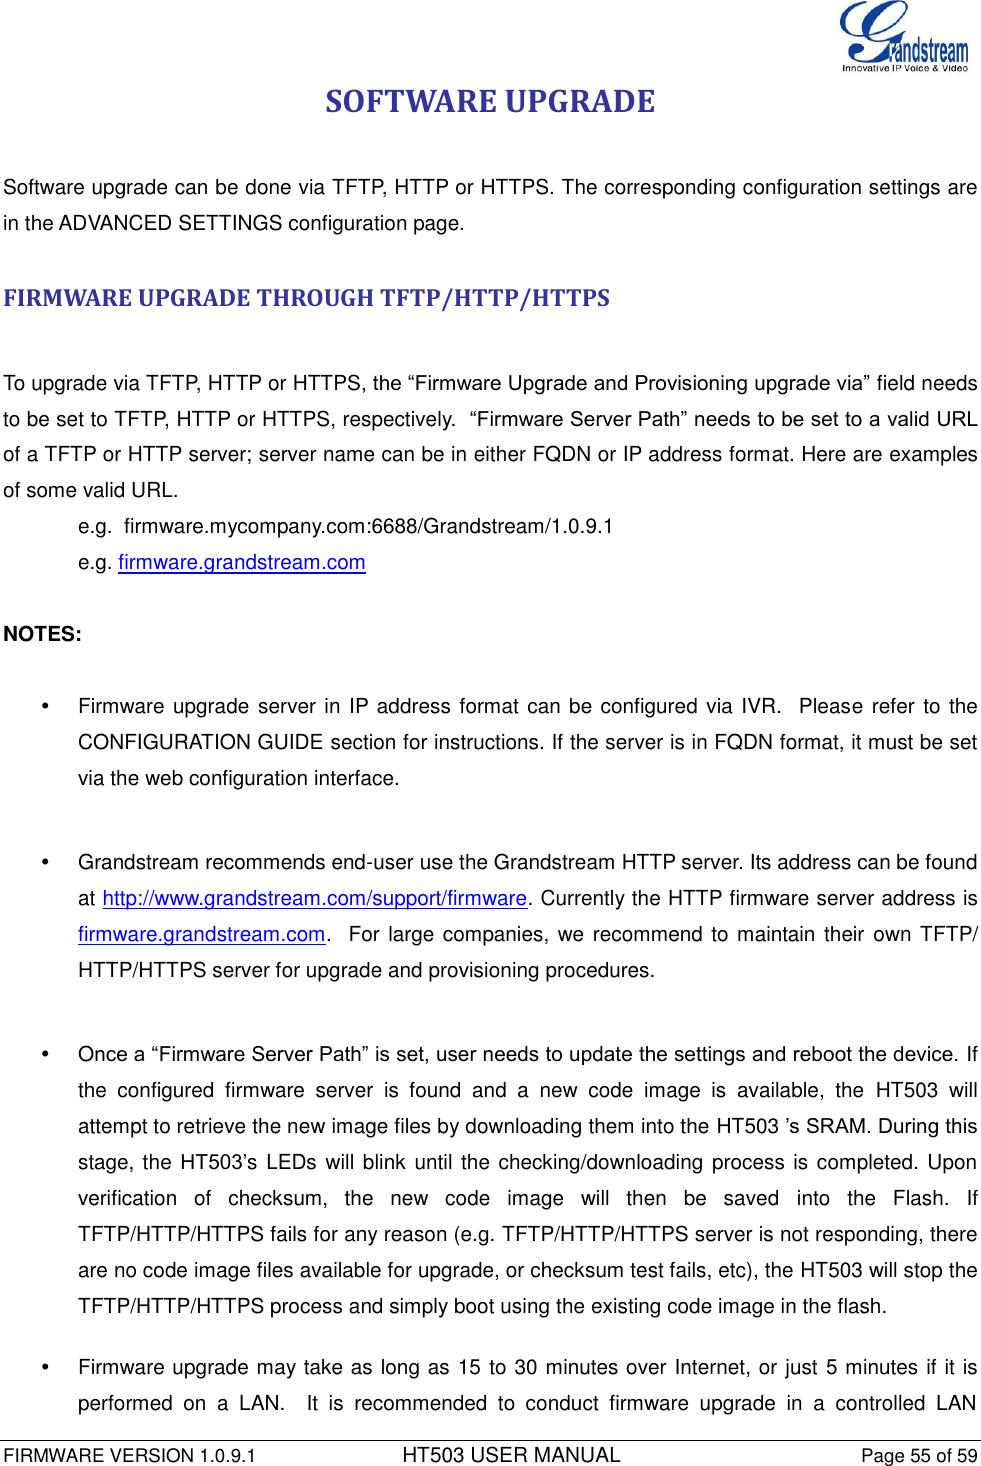  FIRMWARE VERSION 1.0.9.1          HT503 USER MANUAL Page 55 of 59       SOFTWARE UPGRADE  Software upgrade can be done via TFTP, HTTP or HTTPS. The corresponding configuration settings are in the ADVANCED SETTINGS configuration page.   FIRMWARE UPGRADE THROUGH TFTP/HTTP/HTTPS  To upgrade via TFTP, HTTP or HTTPS, the “Firmware Upgrade and Provisioning upgrade via” field needs to be set to TFTP, HTTP or HTTPS, respectively.  “Firmware Server Path” needs to be set to a valid URL of a TFTP or HTTP server; server name can be in either FQDN or IP address format. Here are examples of some valid URL.  e.g.  firmware.mycompany.com:6688/Grandstream/1.0.9.1 e.g. firmware.grandstream.com   NOTES:    Firmware upgrade server in IP address format can be configured via IVR.  Please refer to  the CONFIGURATION GUIDE section for instructions. If the server is in FQDN format, it must be set via the web configuration interface.    Grandstream recommends end-user use the Grandstream HTTP server. Its address can be found at http://www.grandstream.com/support/firmware. Currently the HTTP firmware server address is firmware.grandstream.com.  For large companies,  we recommend to maintain their  own TFTP/ HTTP/HTTPS server for upgrade and provisioning procedures.    Once a “Firmware Server Path” is set, user needs to update the settings and reboot the device. If the  configured  firmware  server  is  found  and  a  new  code  image  is  available,  the  HT503  will attempt to retrieve the new image files by downloading them into the HT503 ’s SRAM. During this stage, the HT503’s  LEDs will blink until the checking/downloading process is completed. Upon verification  of  checksum,  the  new  code  image  will  then  be  saved  into  the  Flash.  If TFTP/HTTP/HTTPS fails for any reason (e.g. TFTP/HTTP/HTTPS server is not responding, there are no code image files available for upgrade, or checksum test fails, etc), the HT503 will stop the TFTP/HTTP/HTTPS process and simply boot using the existing code image in the flash.    Firmware upgrade may take as long as 15 to 30 minutes over Internet, or just 5 minutes if it is performed  on  a  LAN.    It  is  recommended  to  conduct  firmware  upgrade  in  a  controlled  LAN 